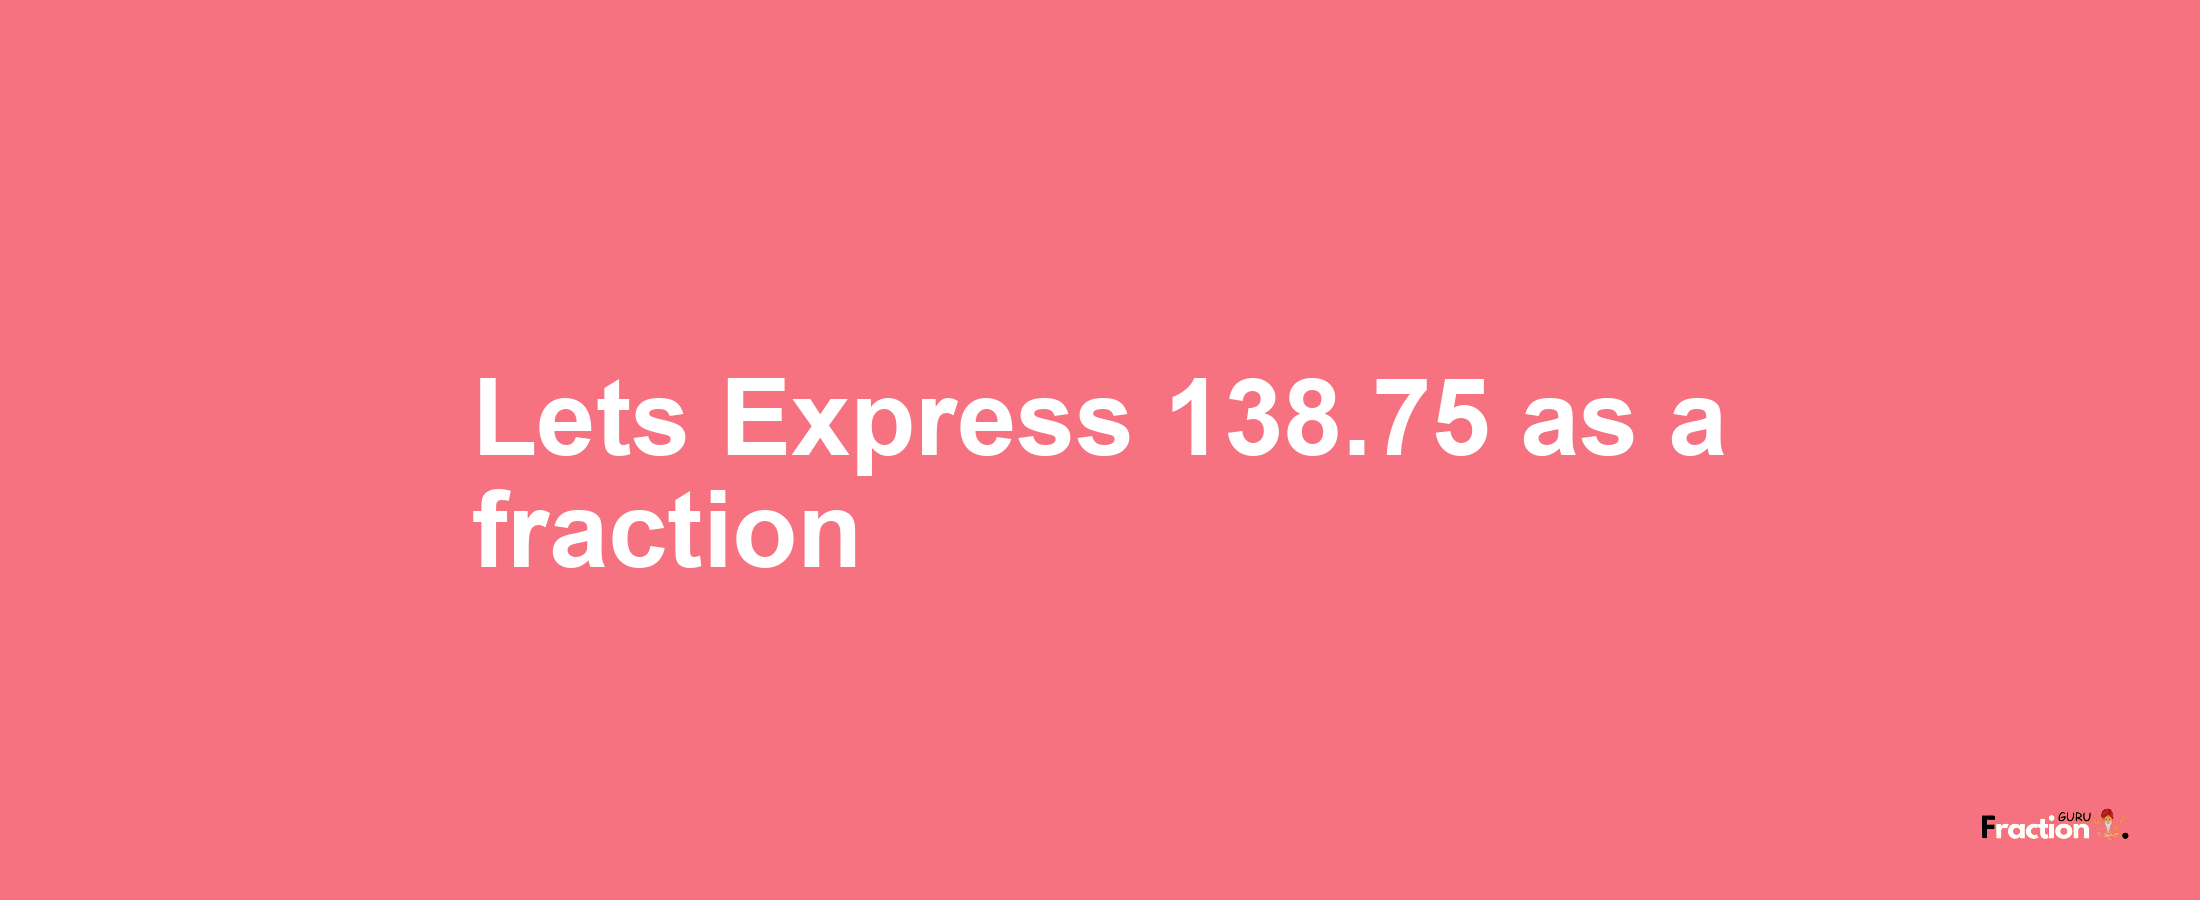 Lets Express 138.75 as afraction